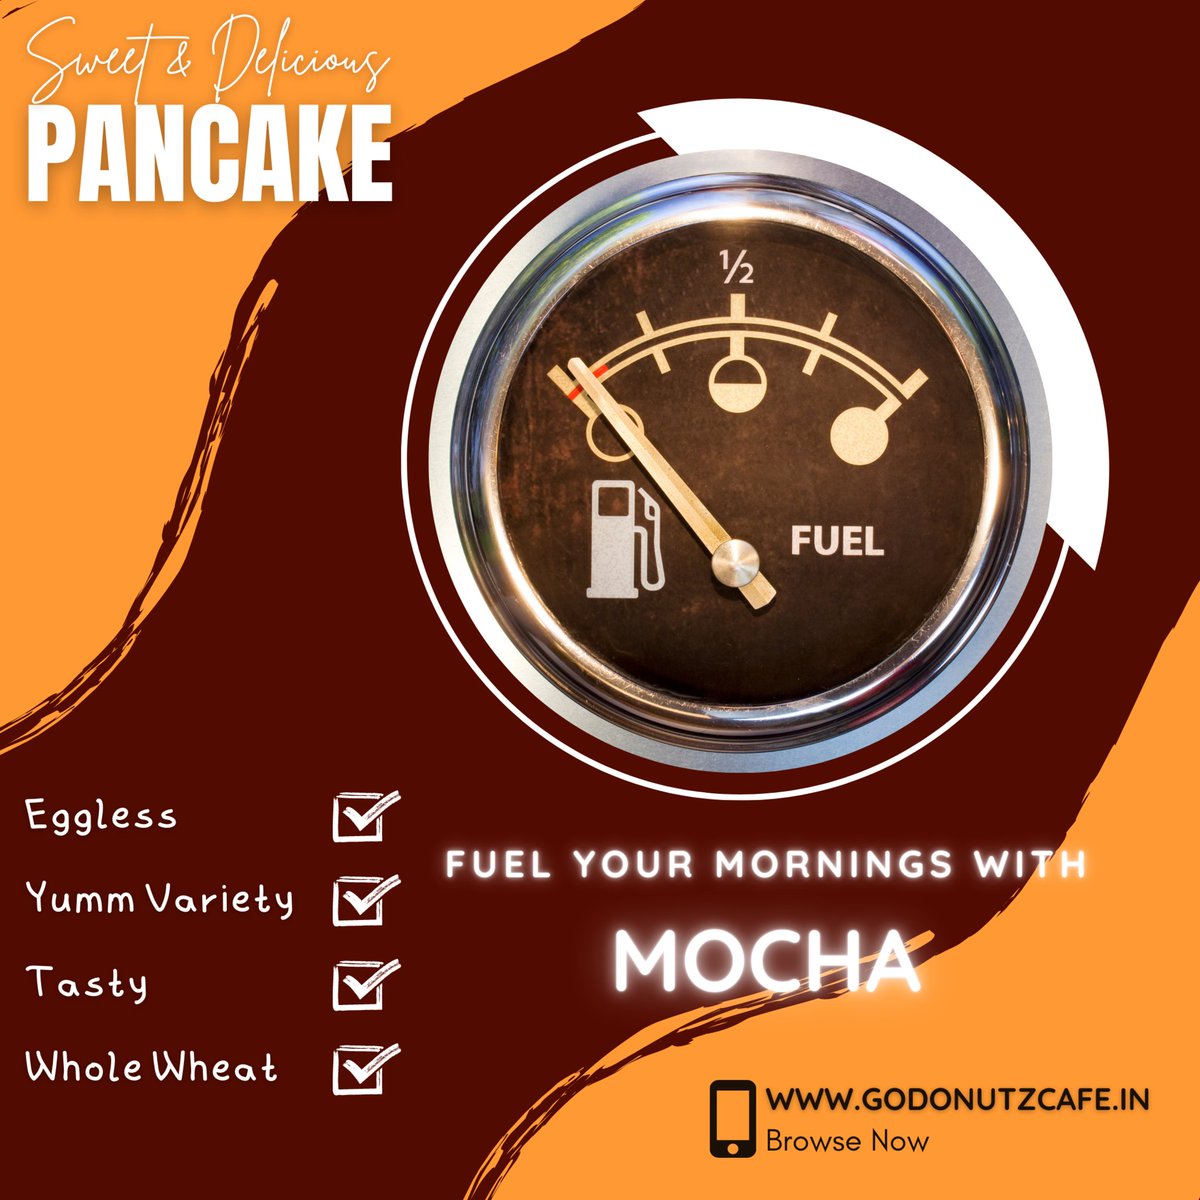 Start your day with a little chocolatey, coffee goodness! Our mocha pancake recipe is a delicious way to fuel your morning.
@godoohnutz
🌐bit.ly/3nts2It #breakfastofchampions #foodblogger #godoohnutz #mochapancakes #mochaforbreakfast #mochalover #mochaaddict